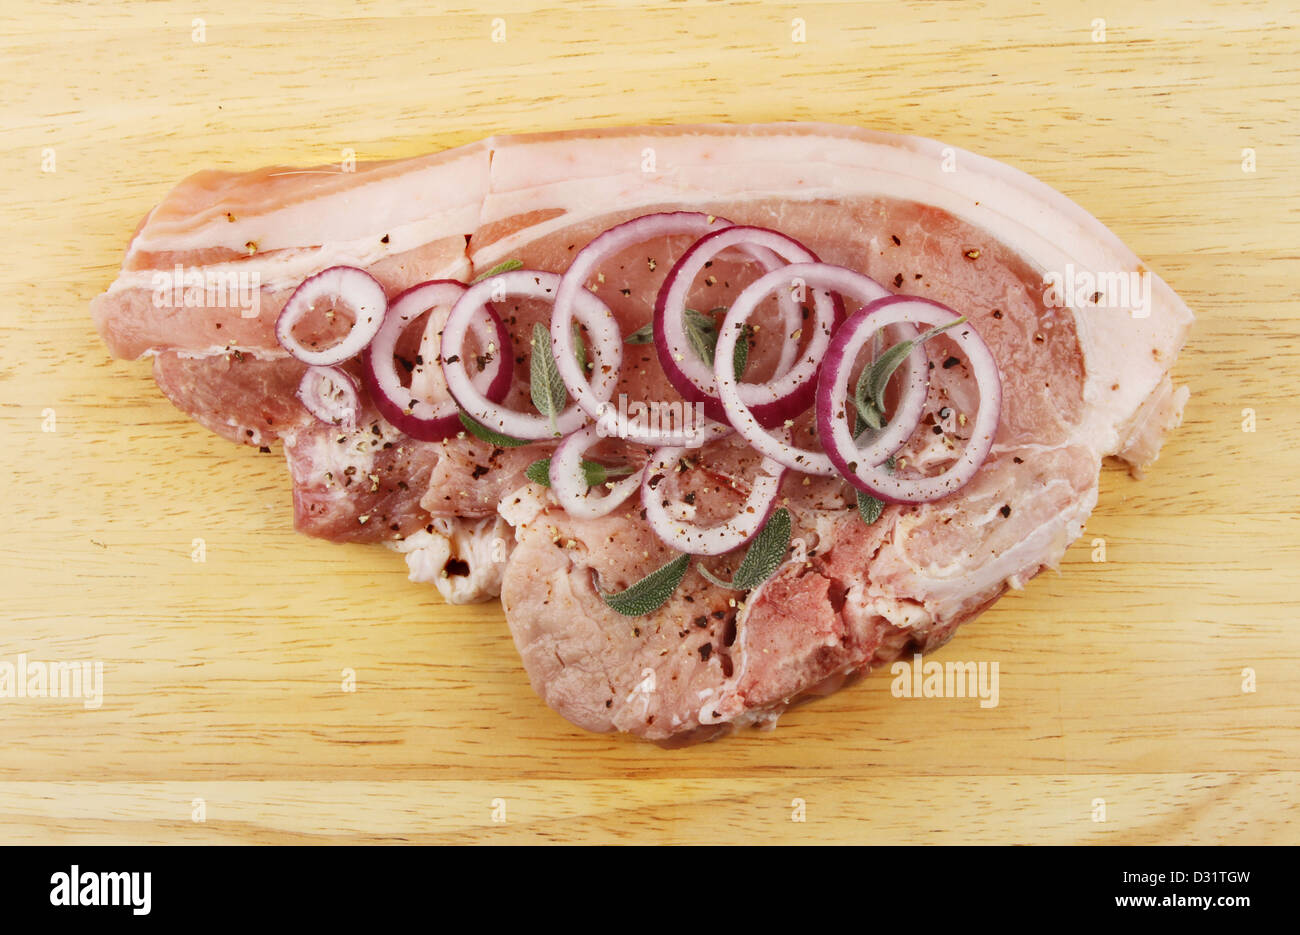 Pork chop with onion, sage and pepper on a wooden board Stock Photo